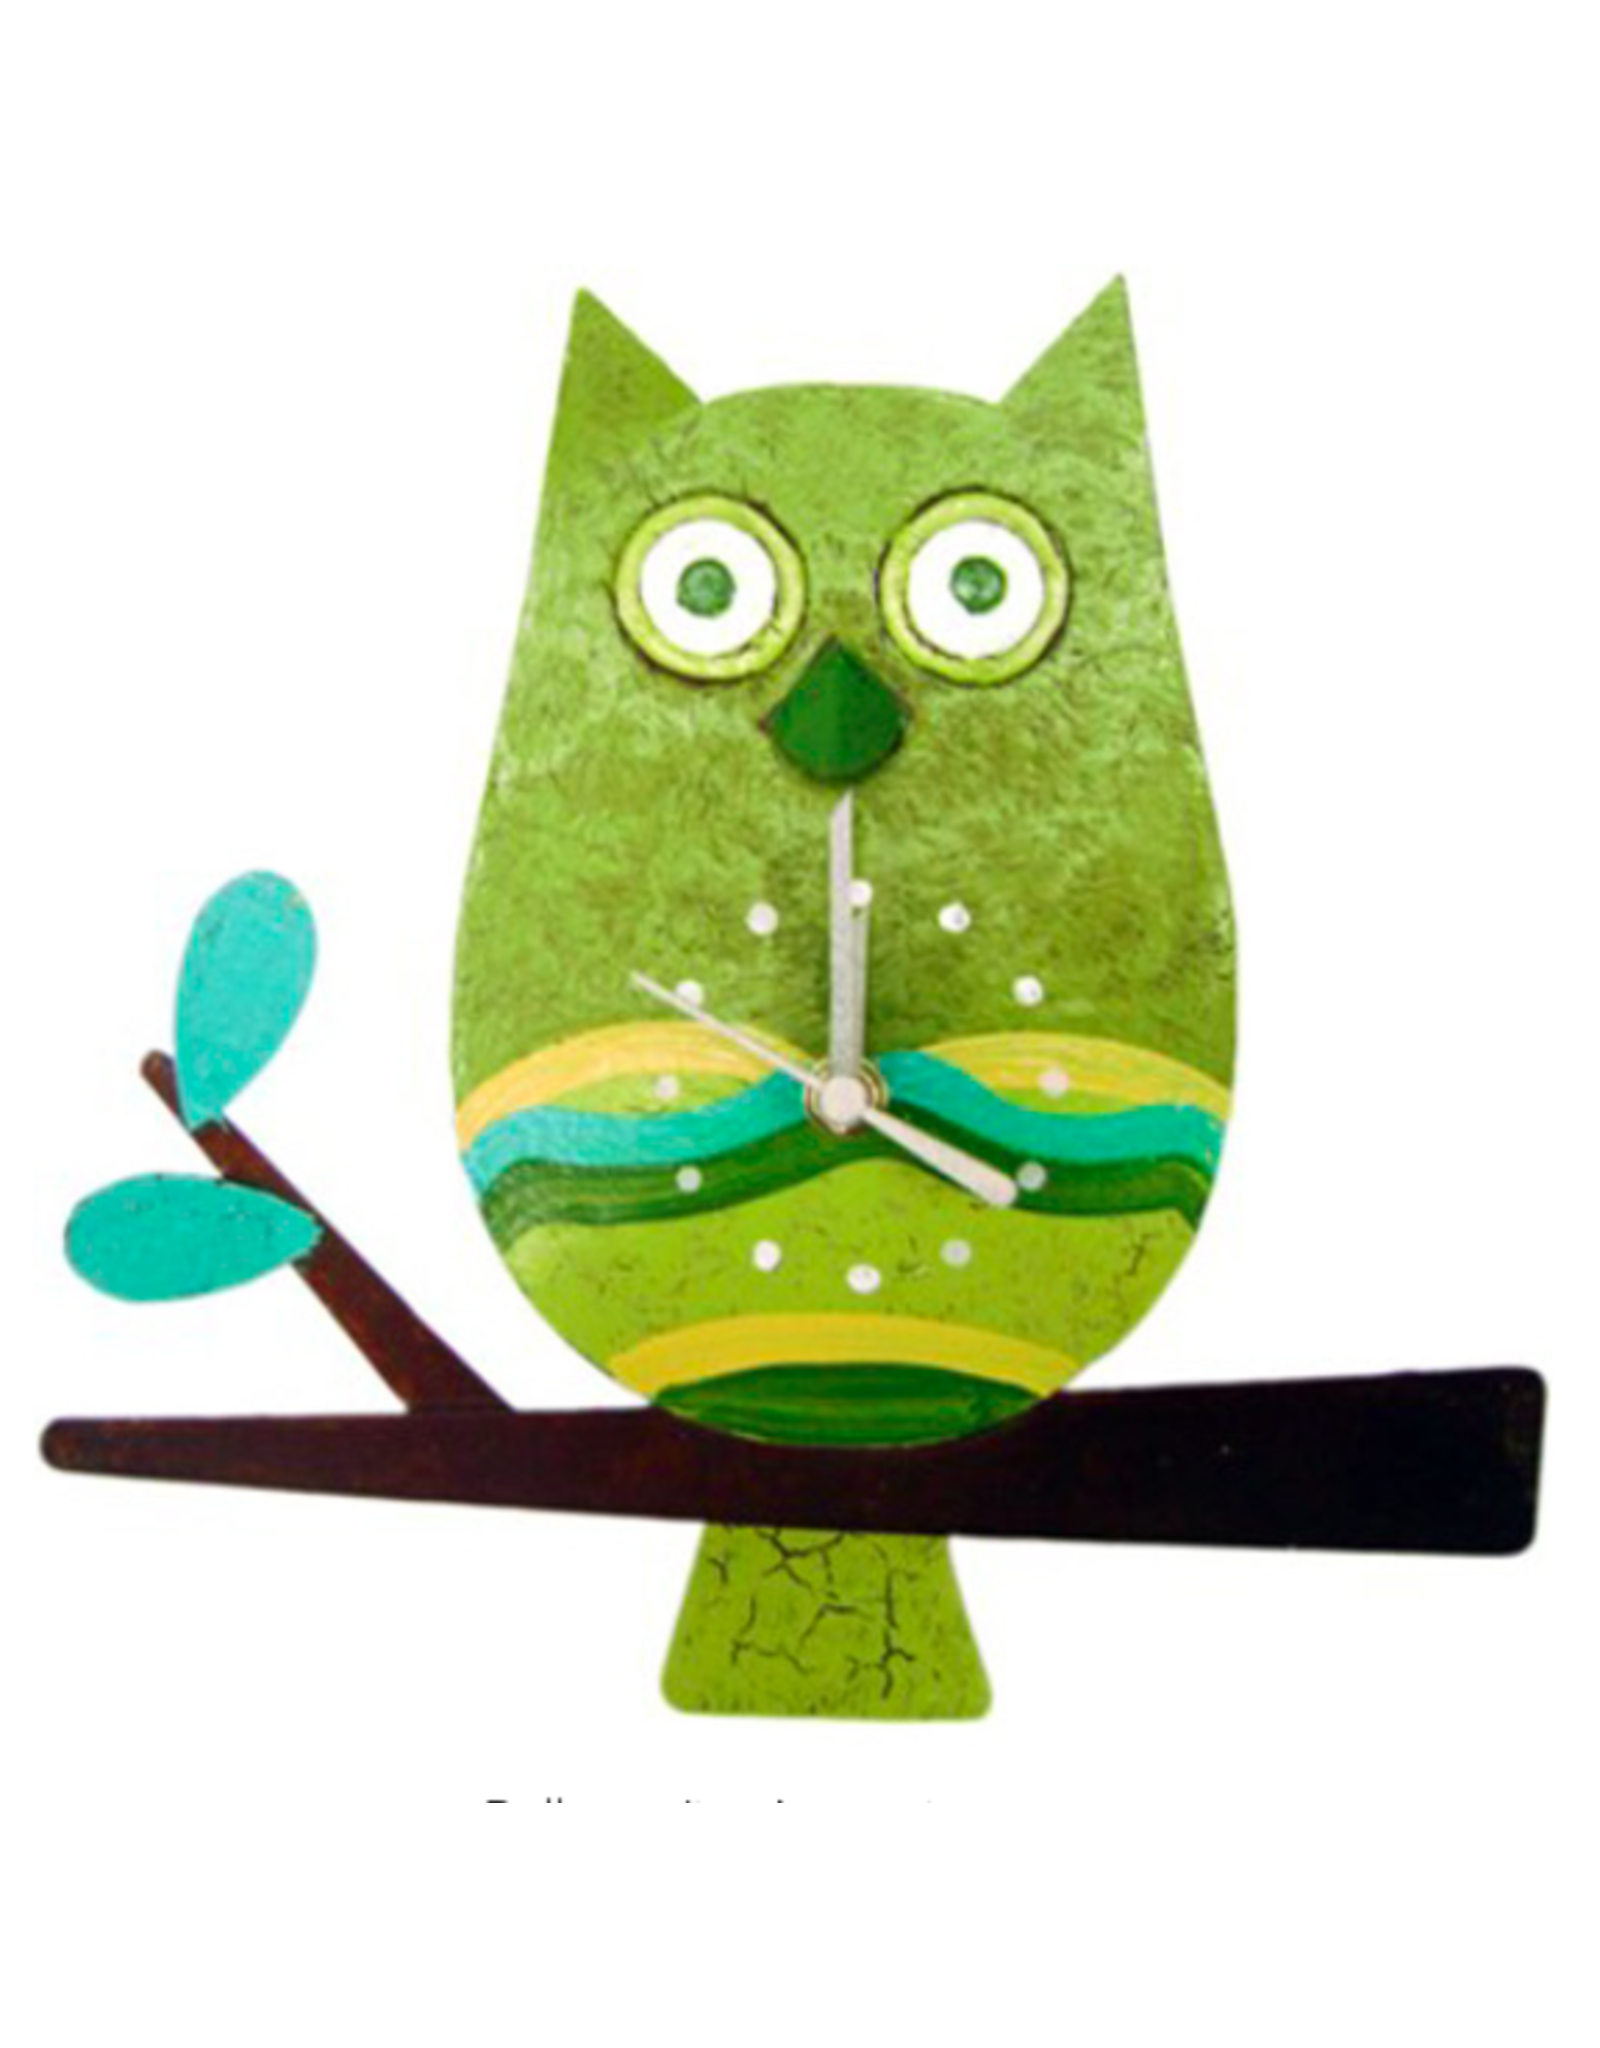 Trade roots Colombia, Silly Clock Green Owl